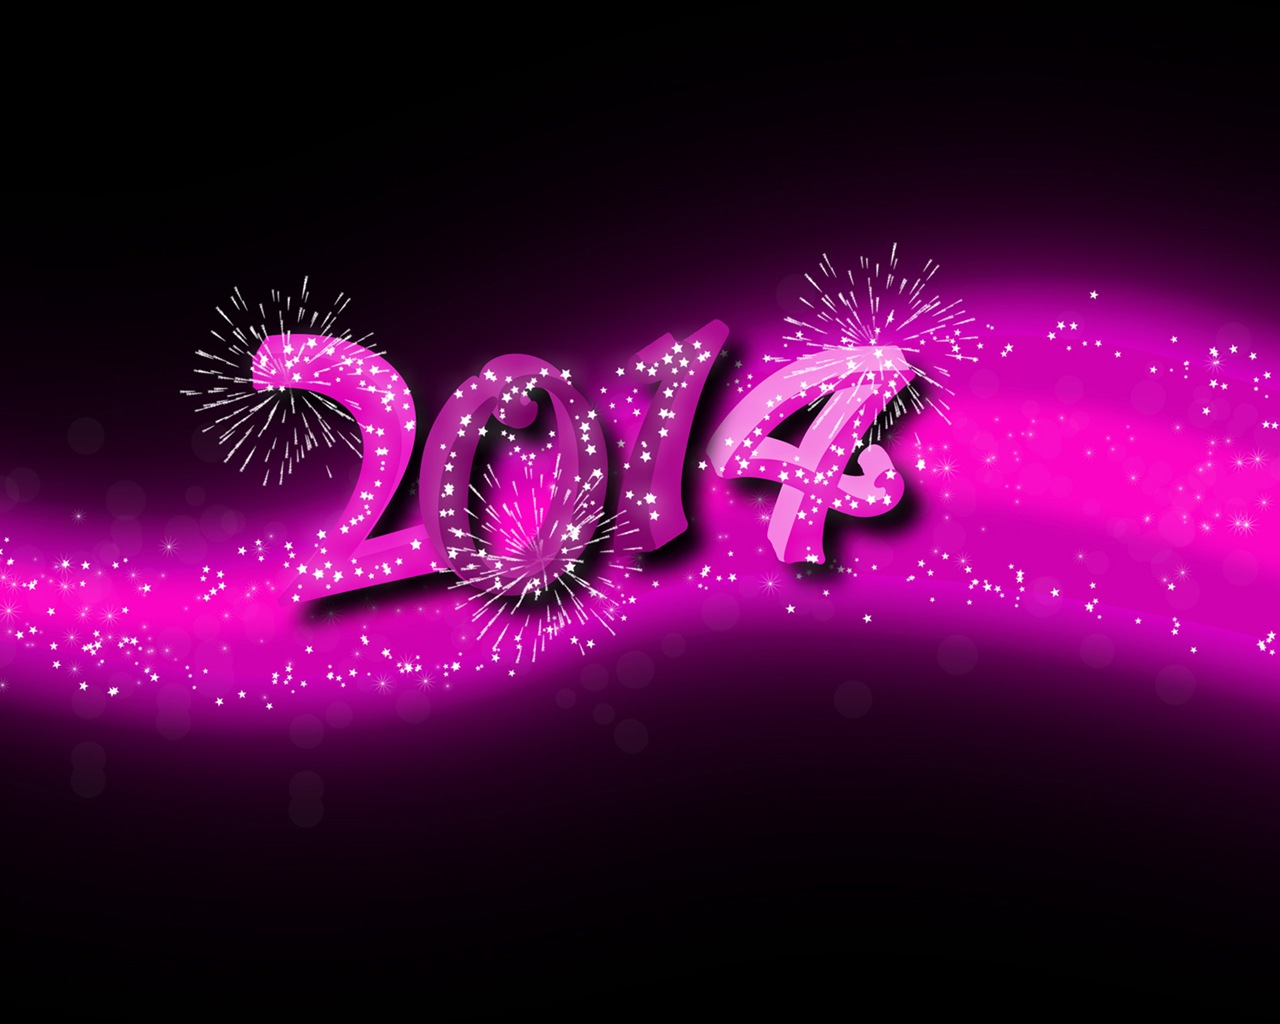 2014 New Year Theme HD Wallpapers (2) #4 - 1280x1024